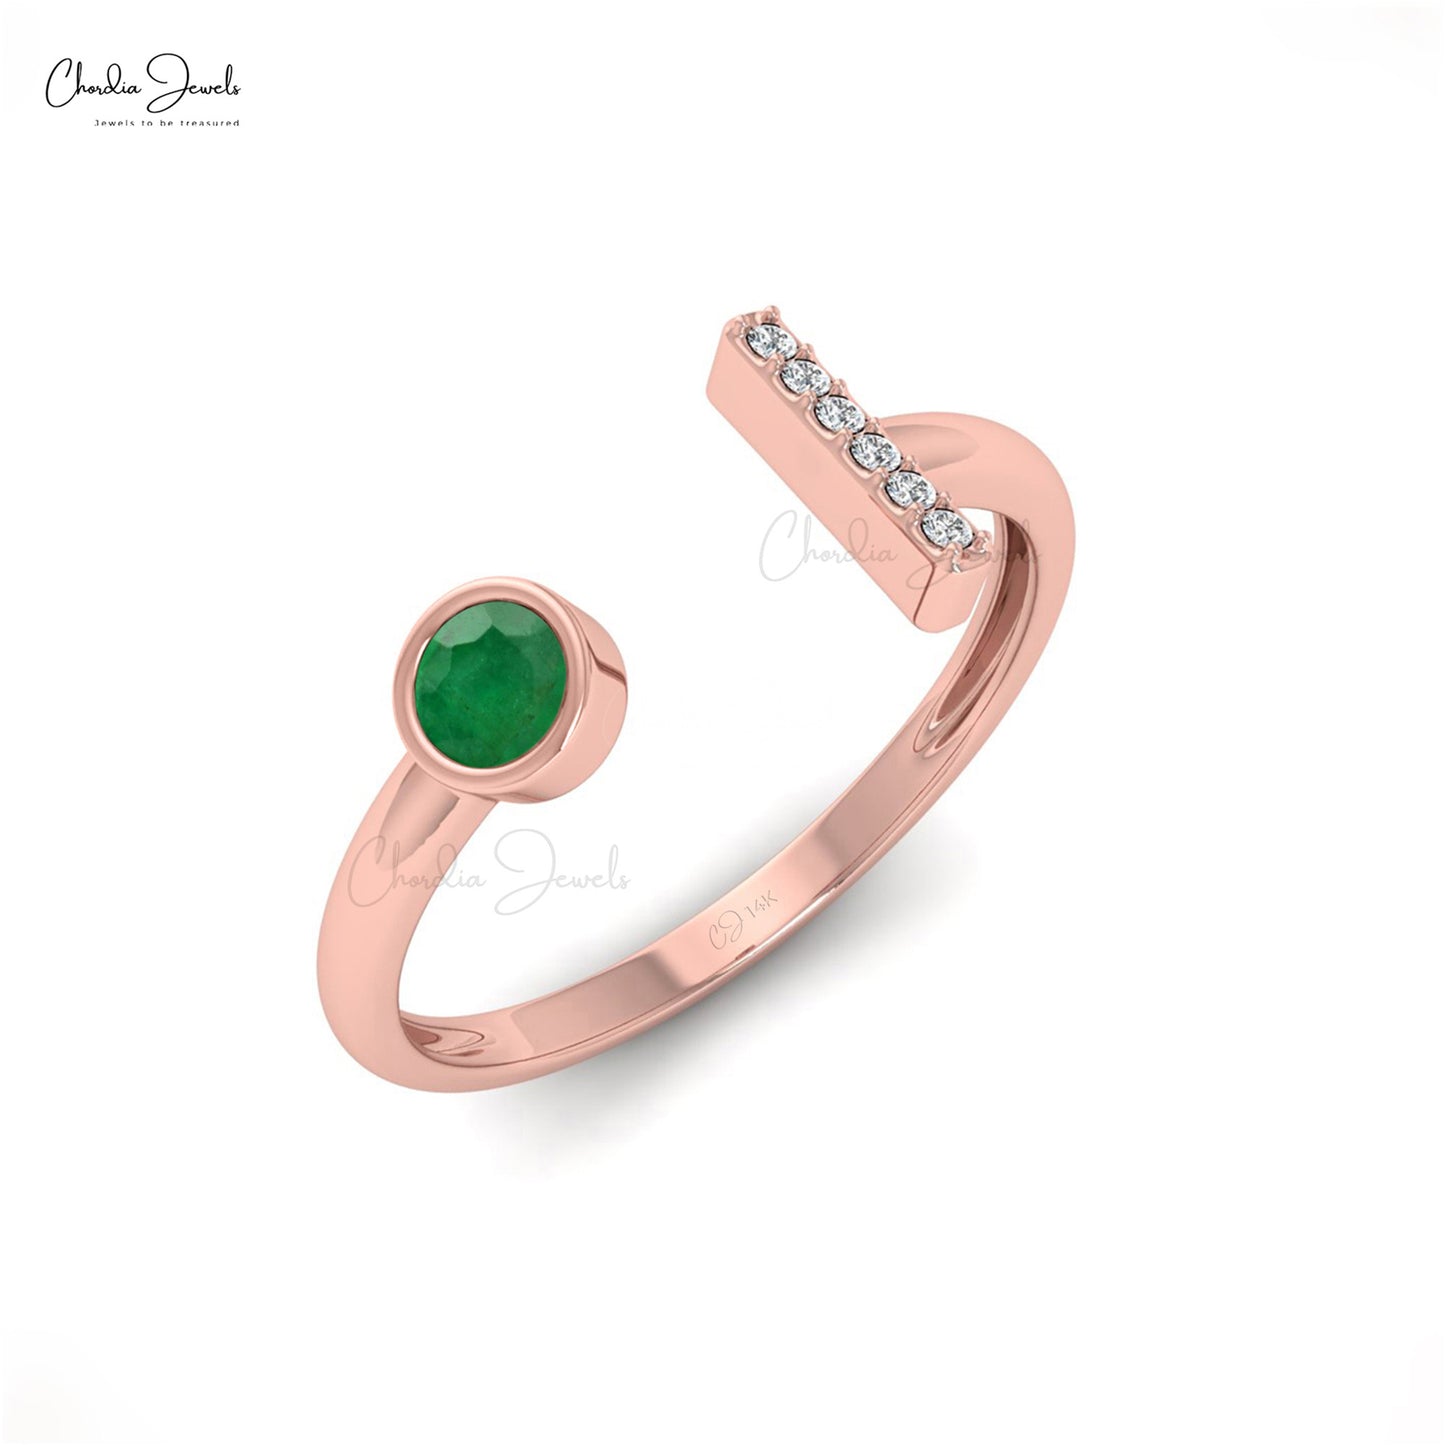 Elevate your elegance with this emerald diamond bar ring.